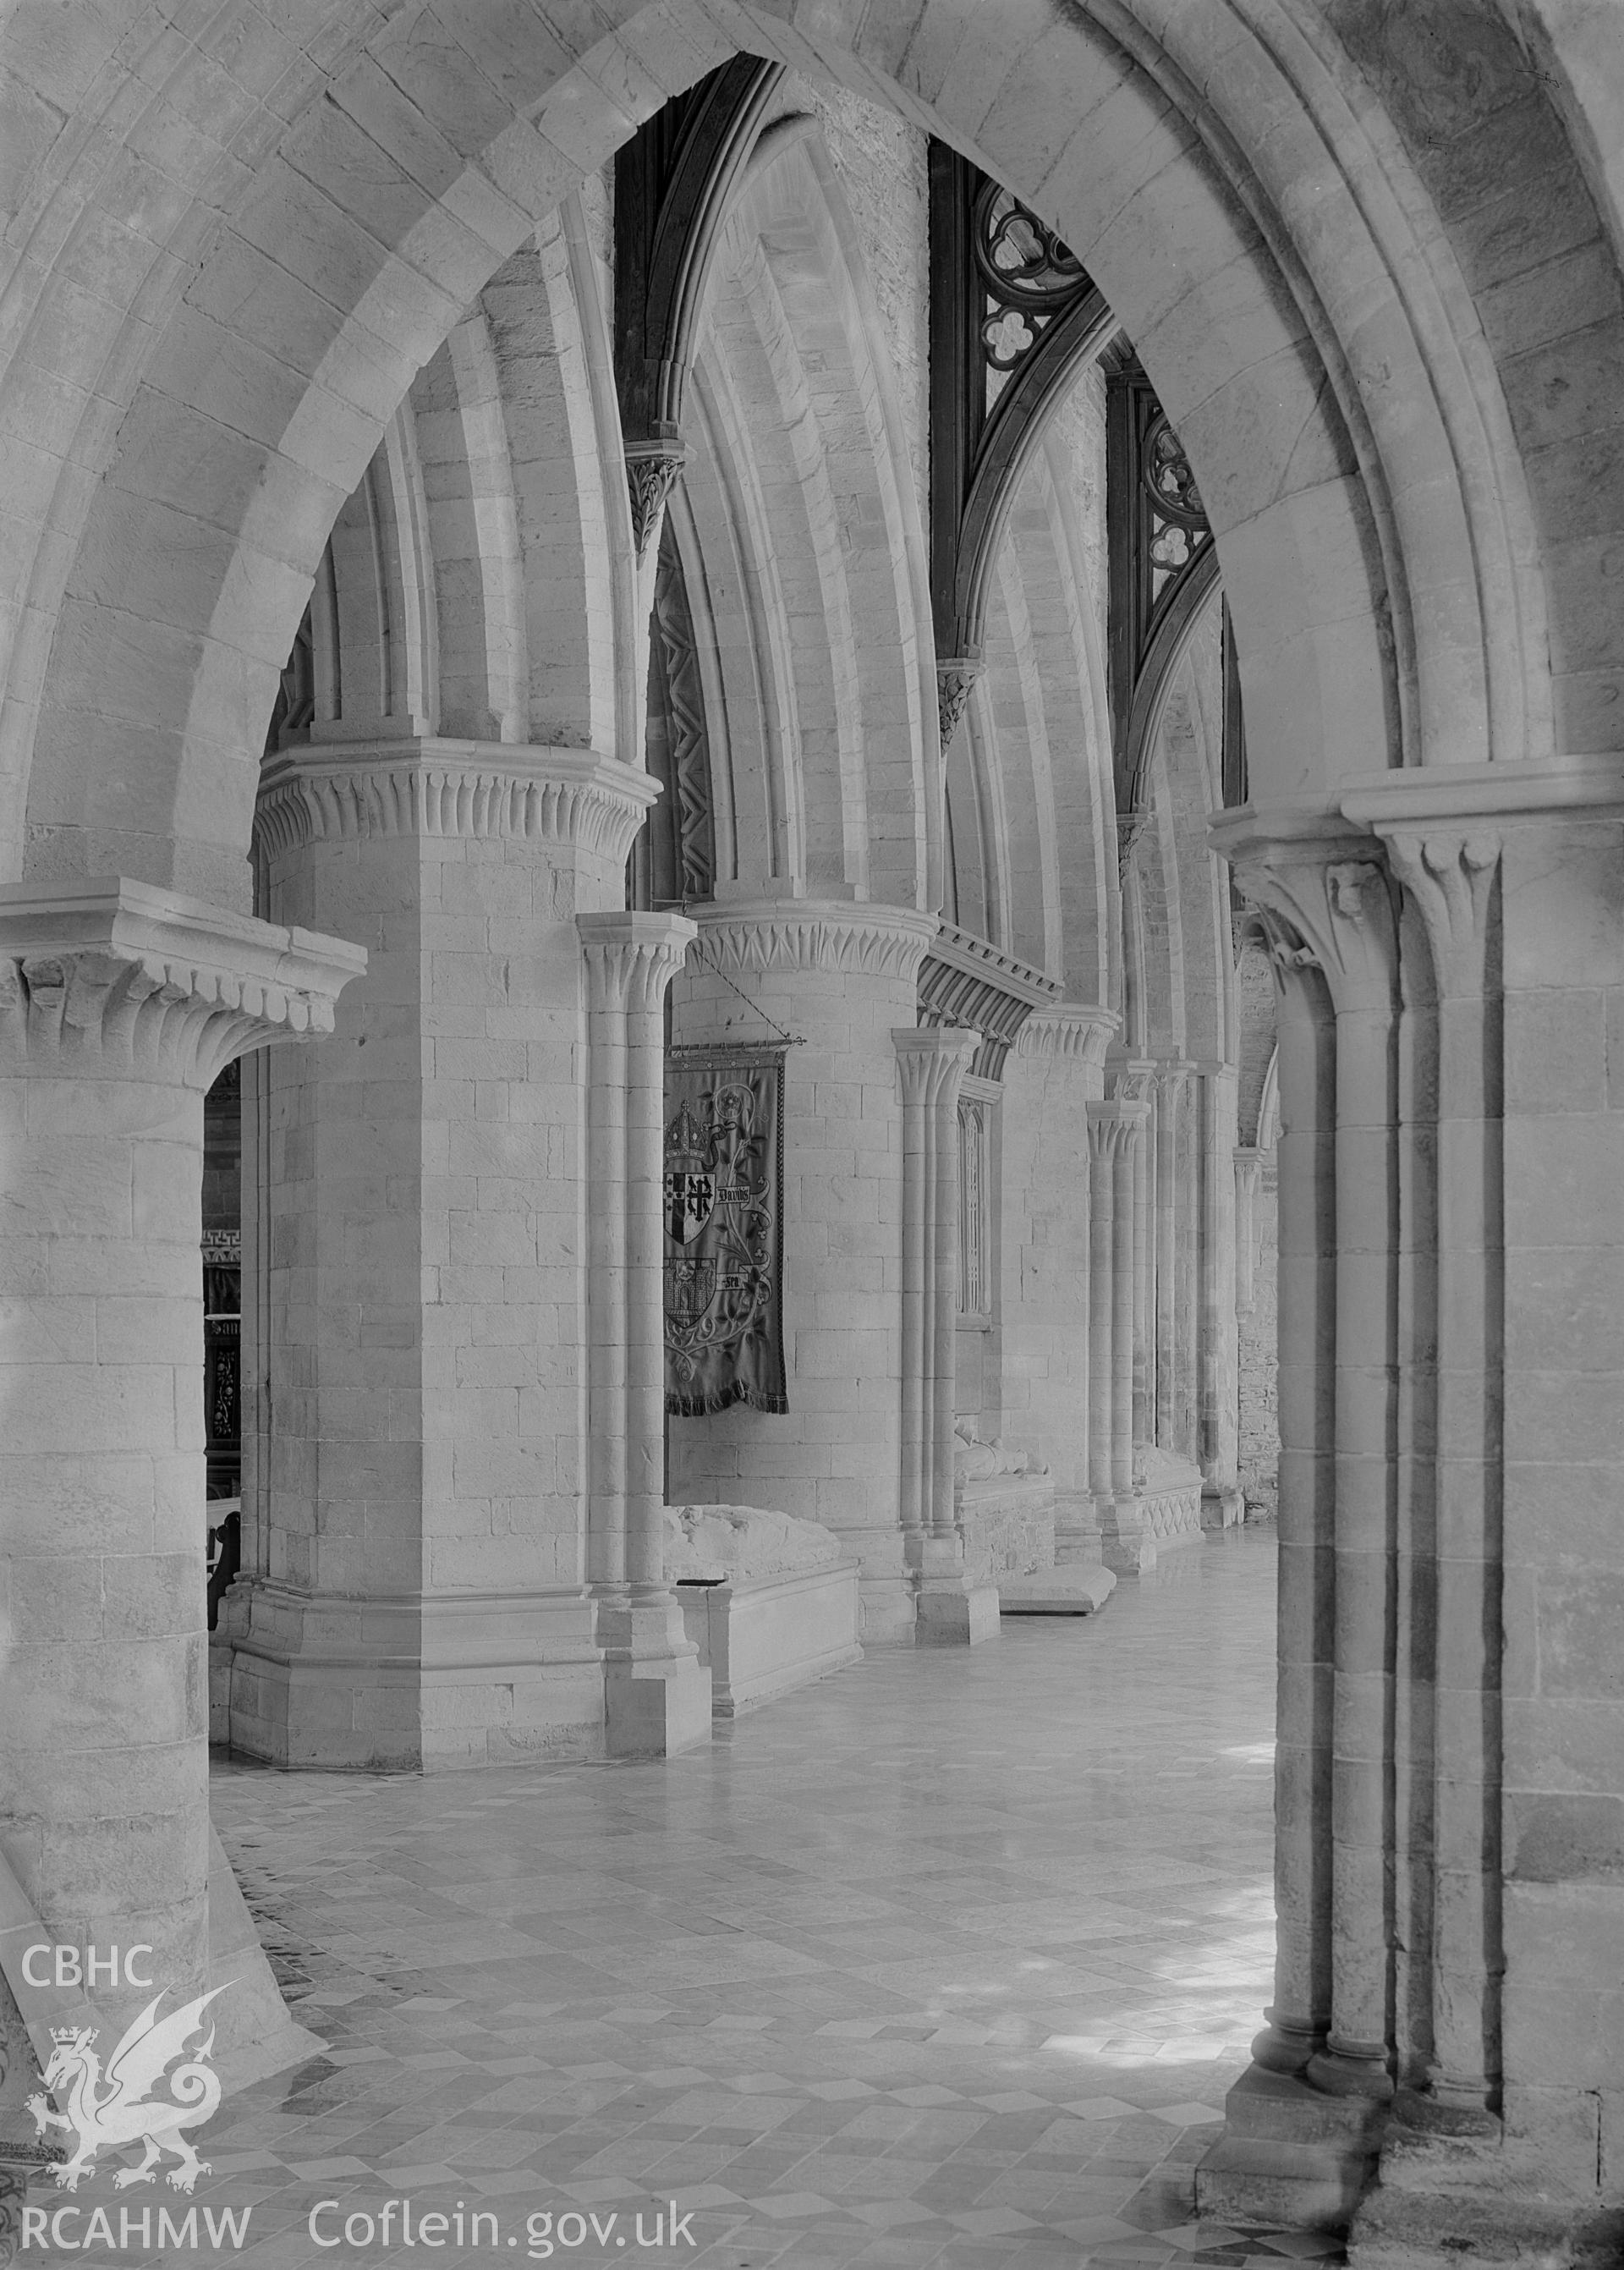 Interior view of St Davids Cathedral showing the south aisle.